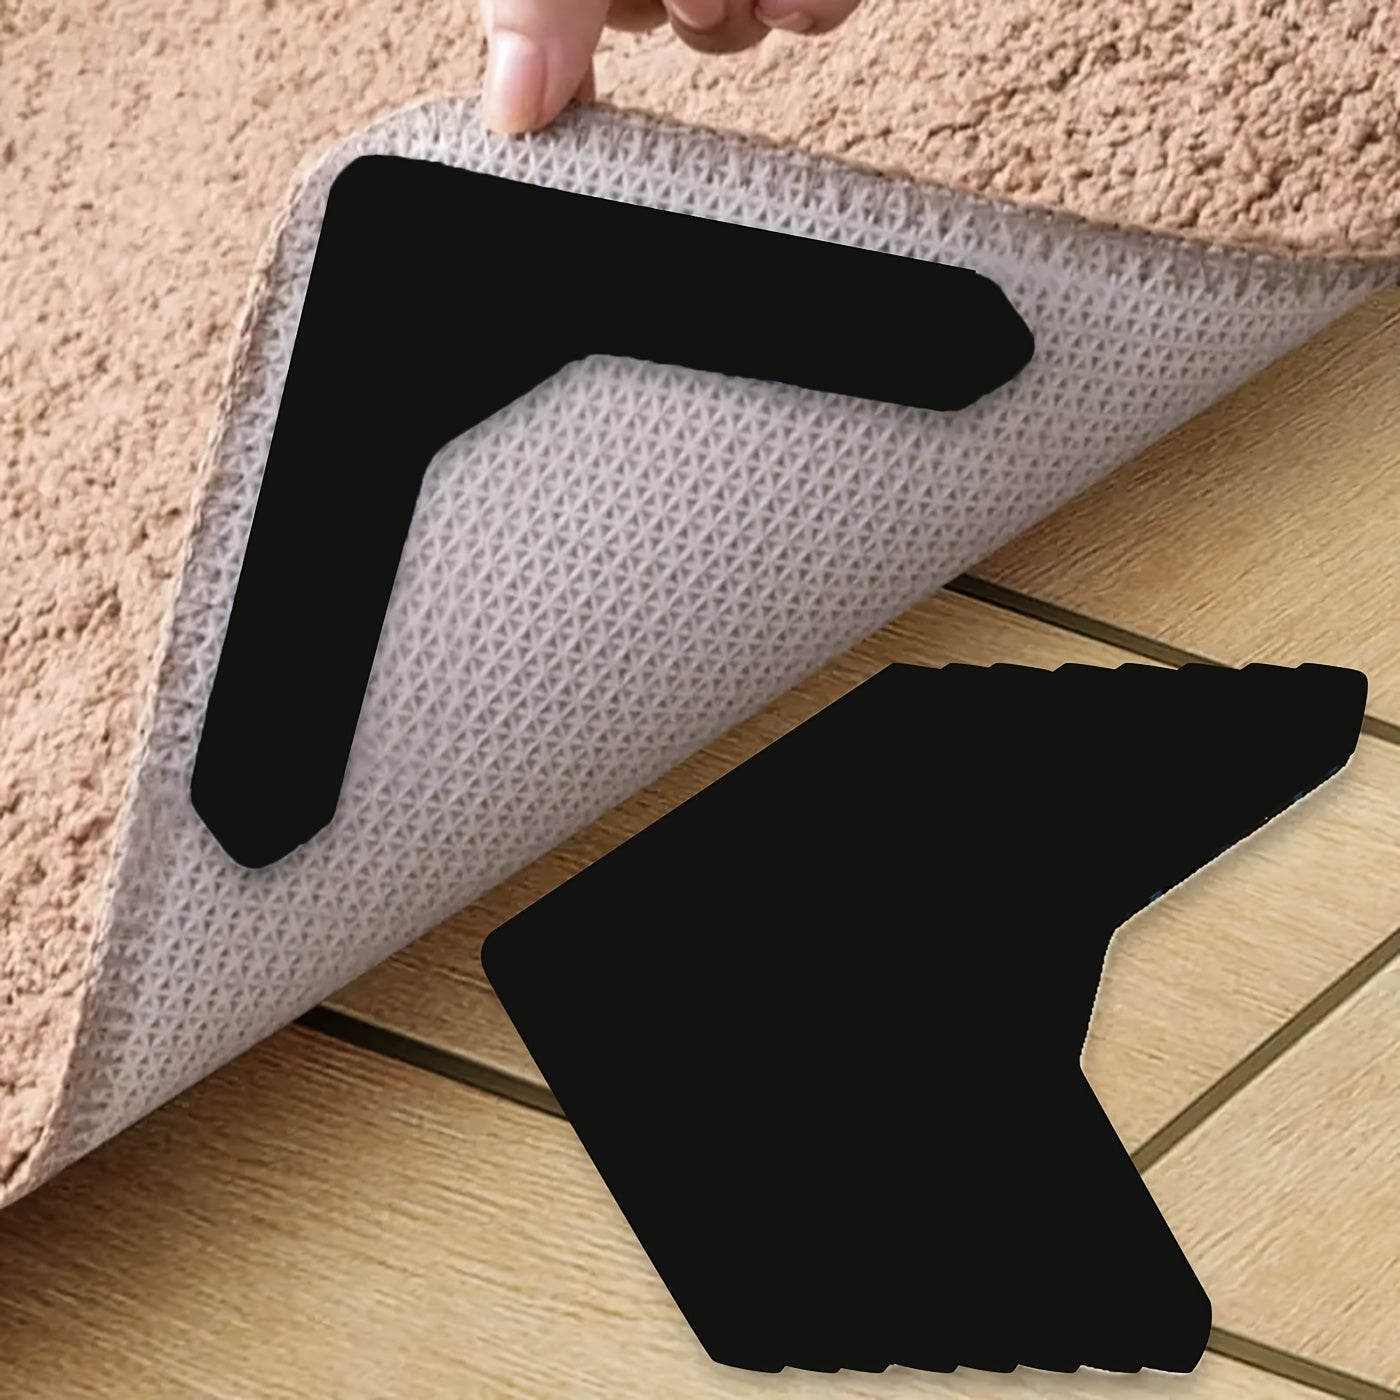 16pcs High Quality Non-slip Anti-drill Carpet Stickers Suitable For Living Room Dining Room Bathroom Rugs, Prevent Rugs From Moving And Rolling Edges